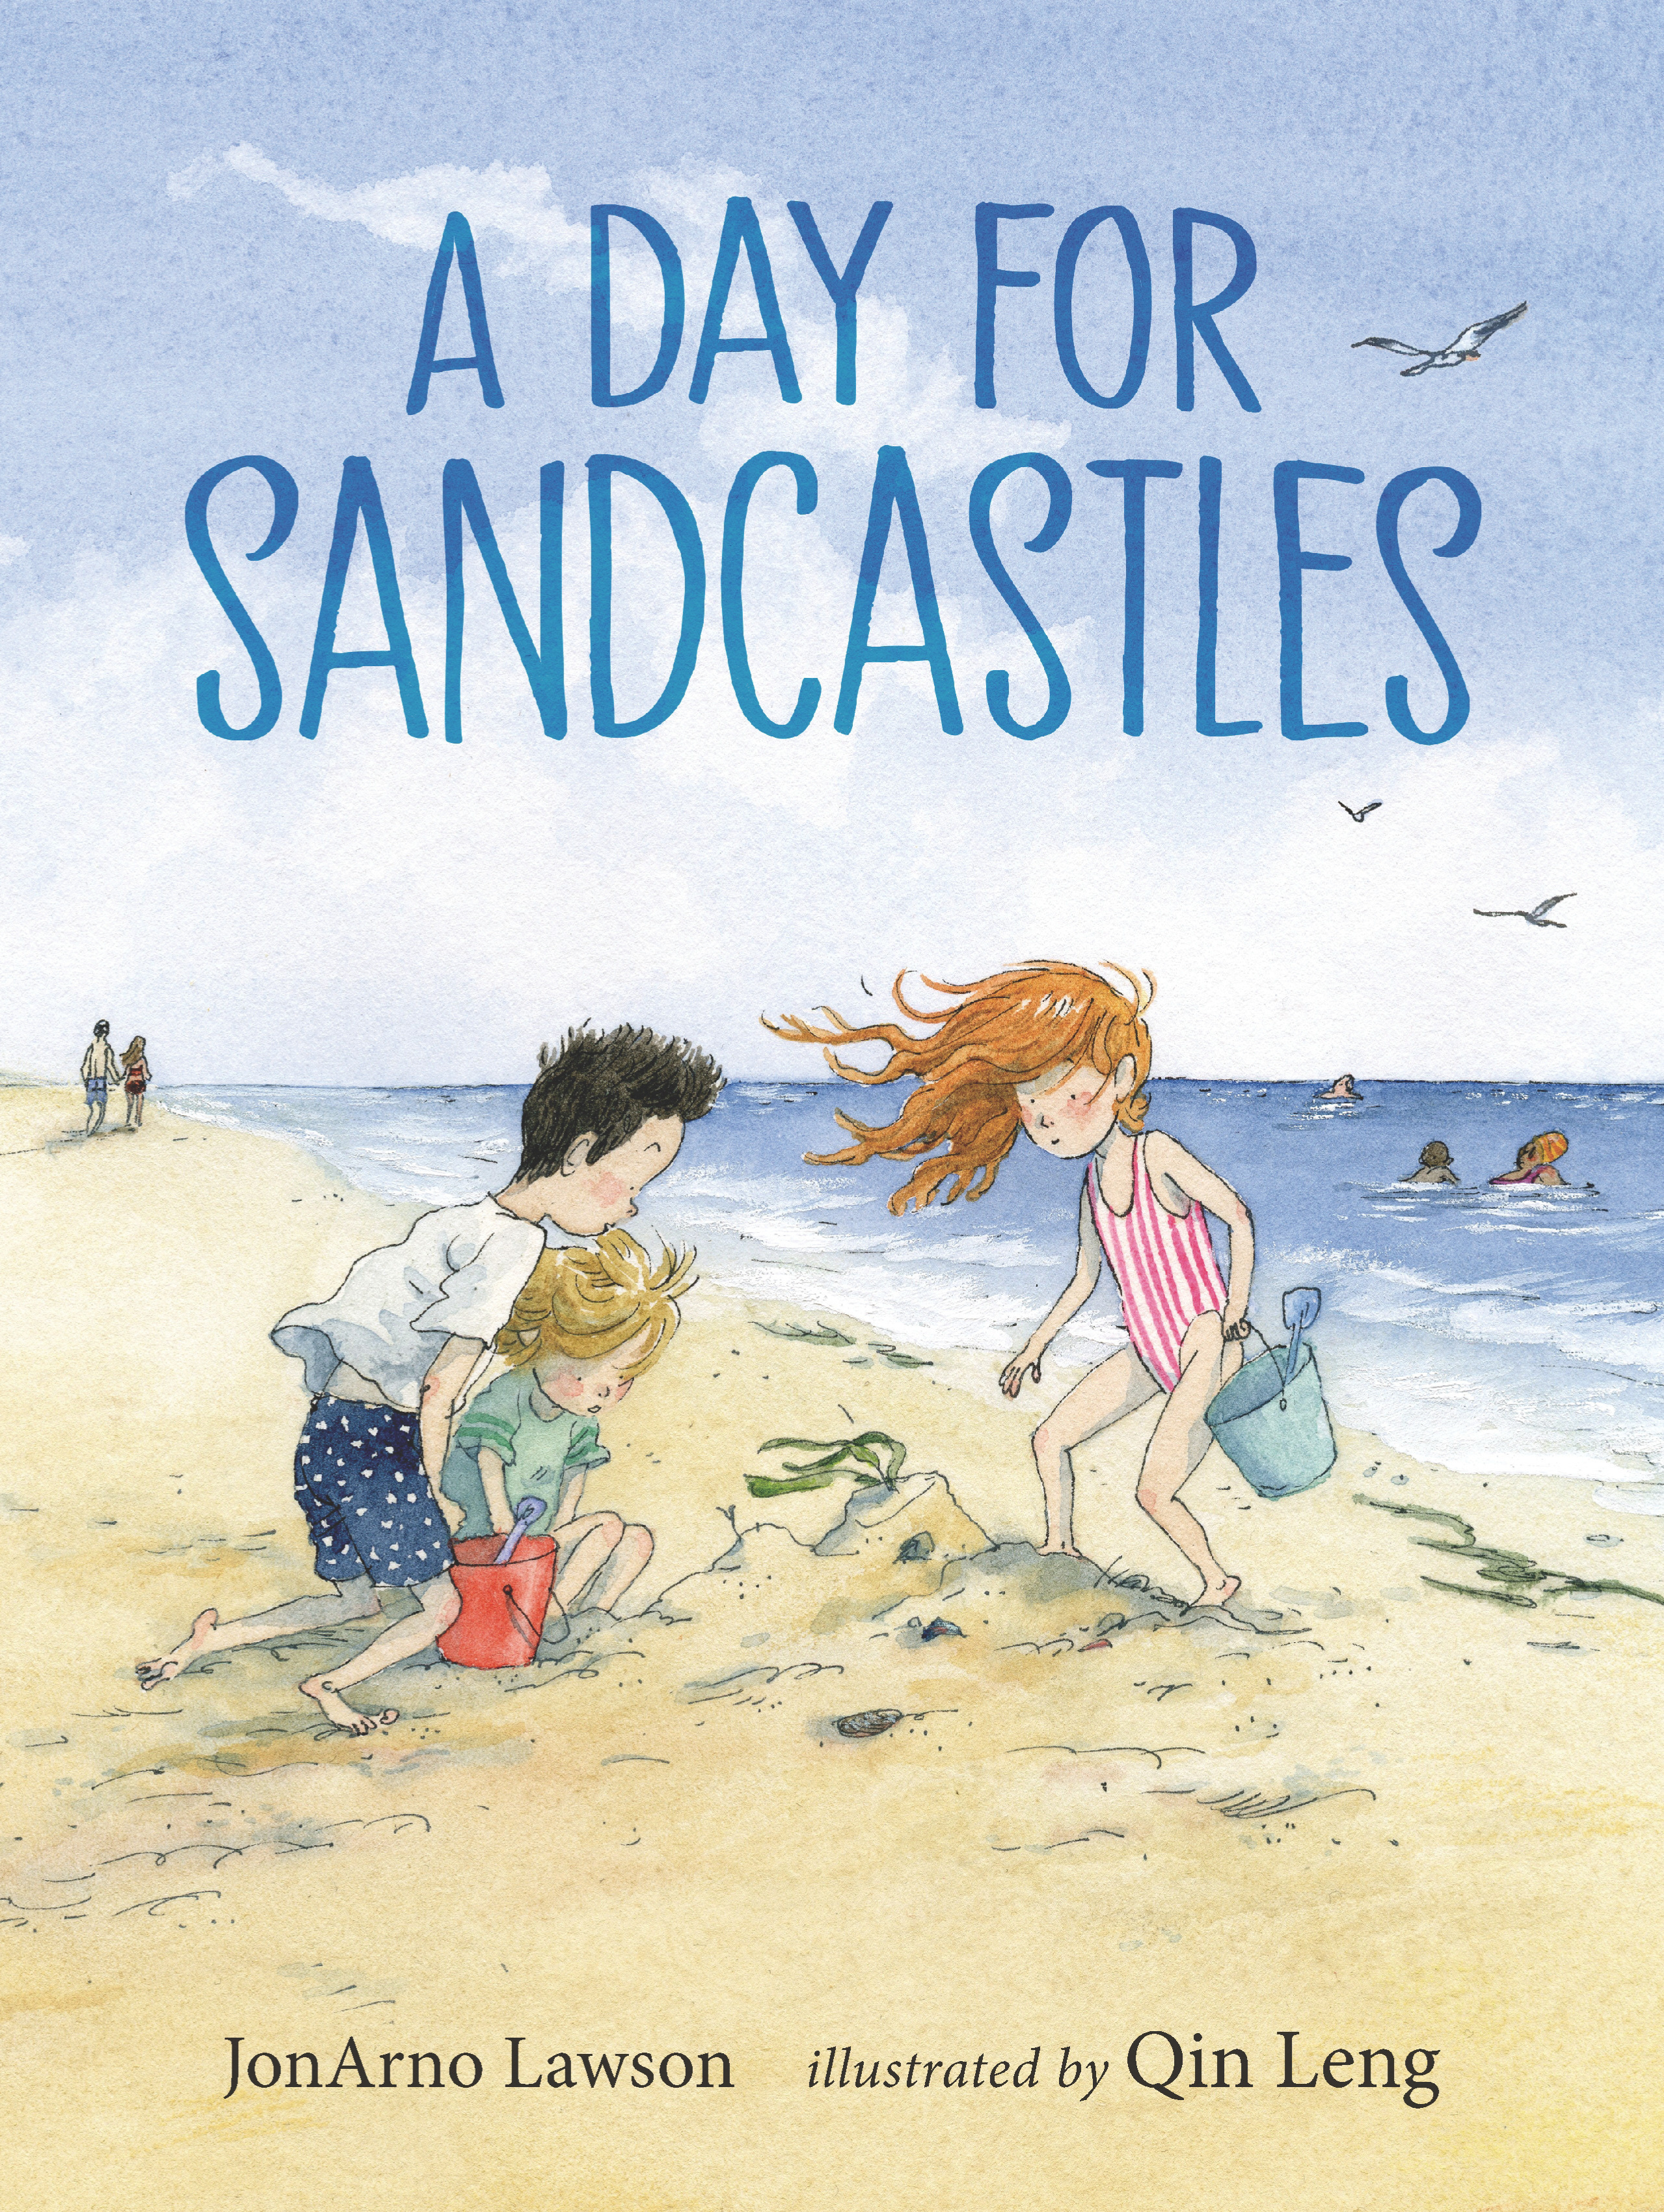 Jonarno Lawson and Qin Leng's A Day For Sandcastles book cover